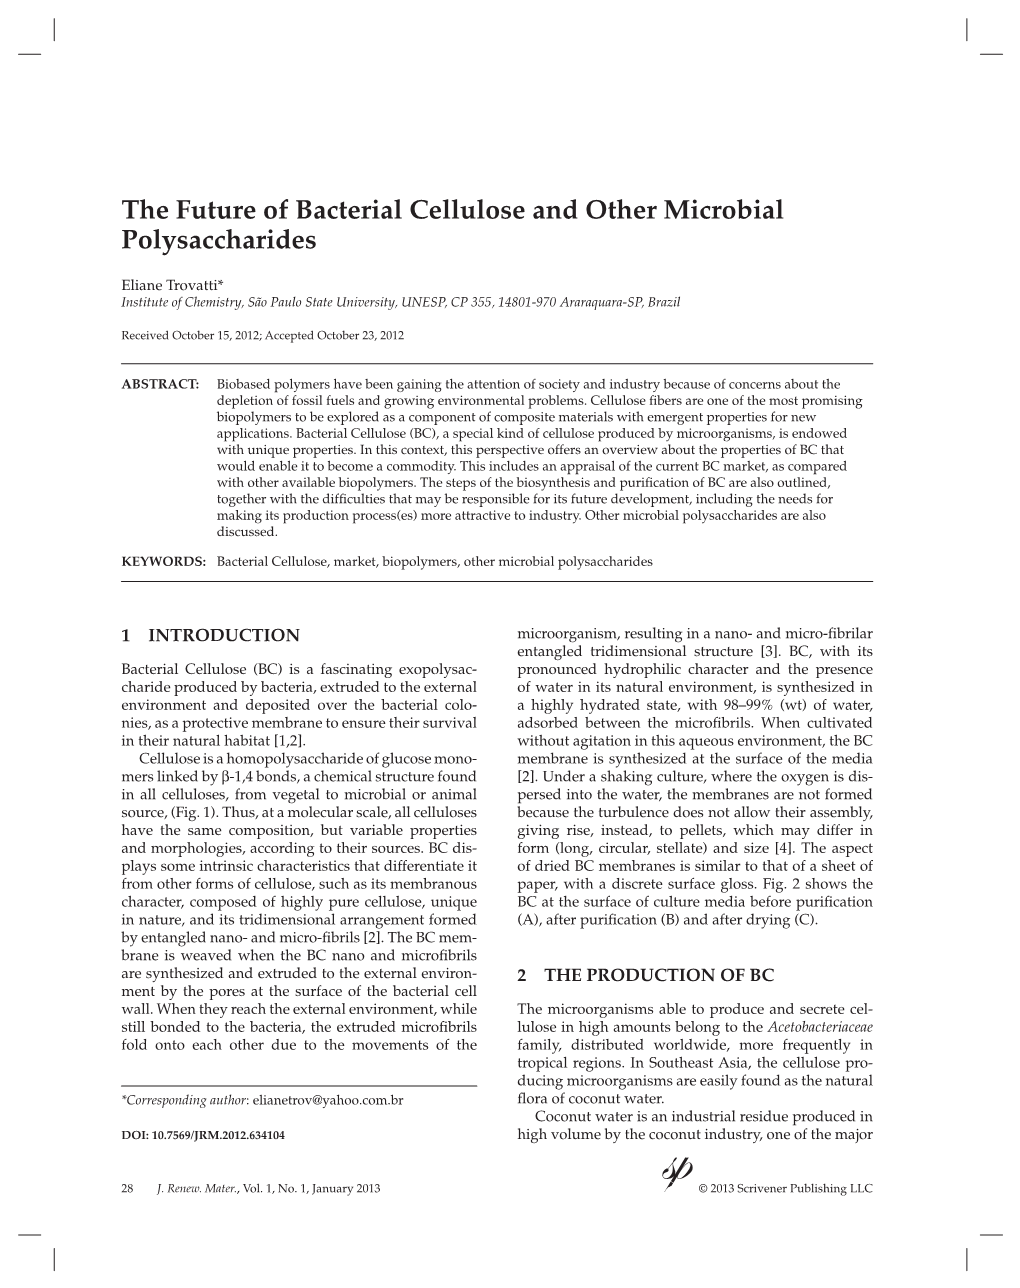 The Future of Bacterial Cellulose and Other Microbial Polysaccharides